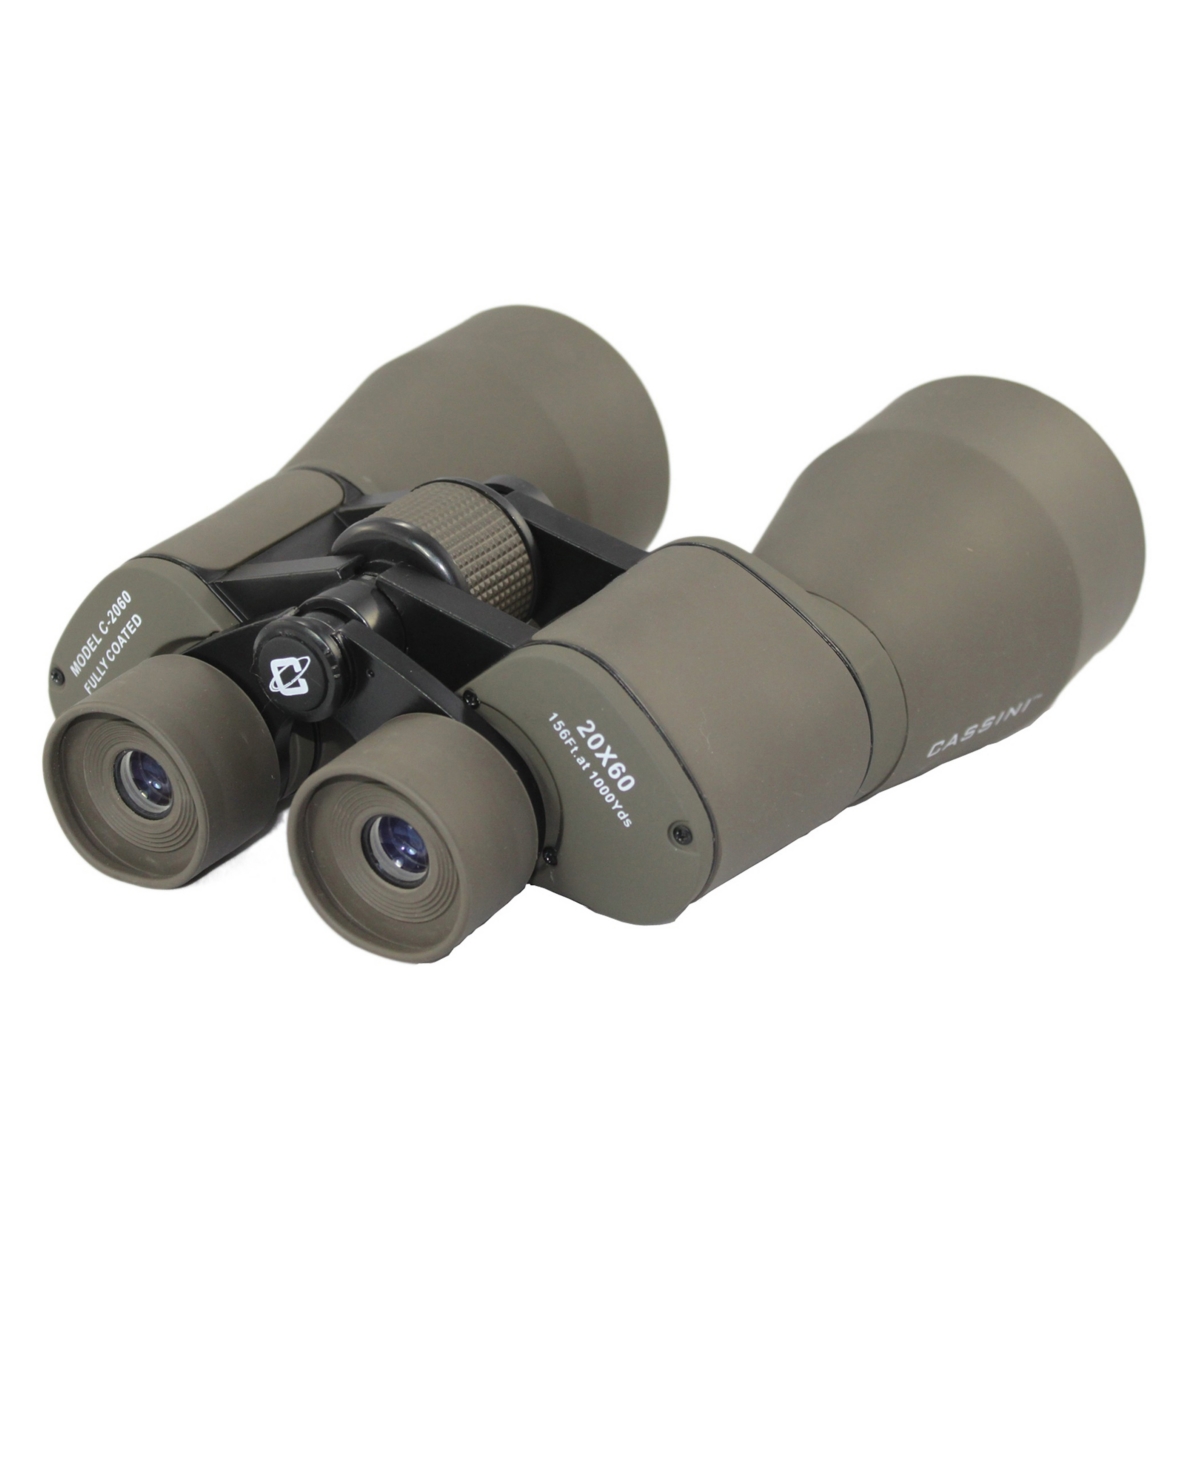 Shop Cassini 20 X 60mm Binocular With Tripod Socket, Fold Down Eye Guards And Case In Charcoal